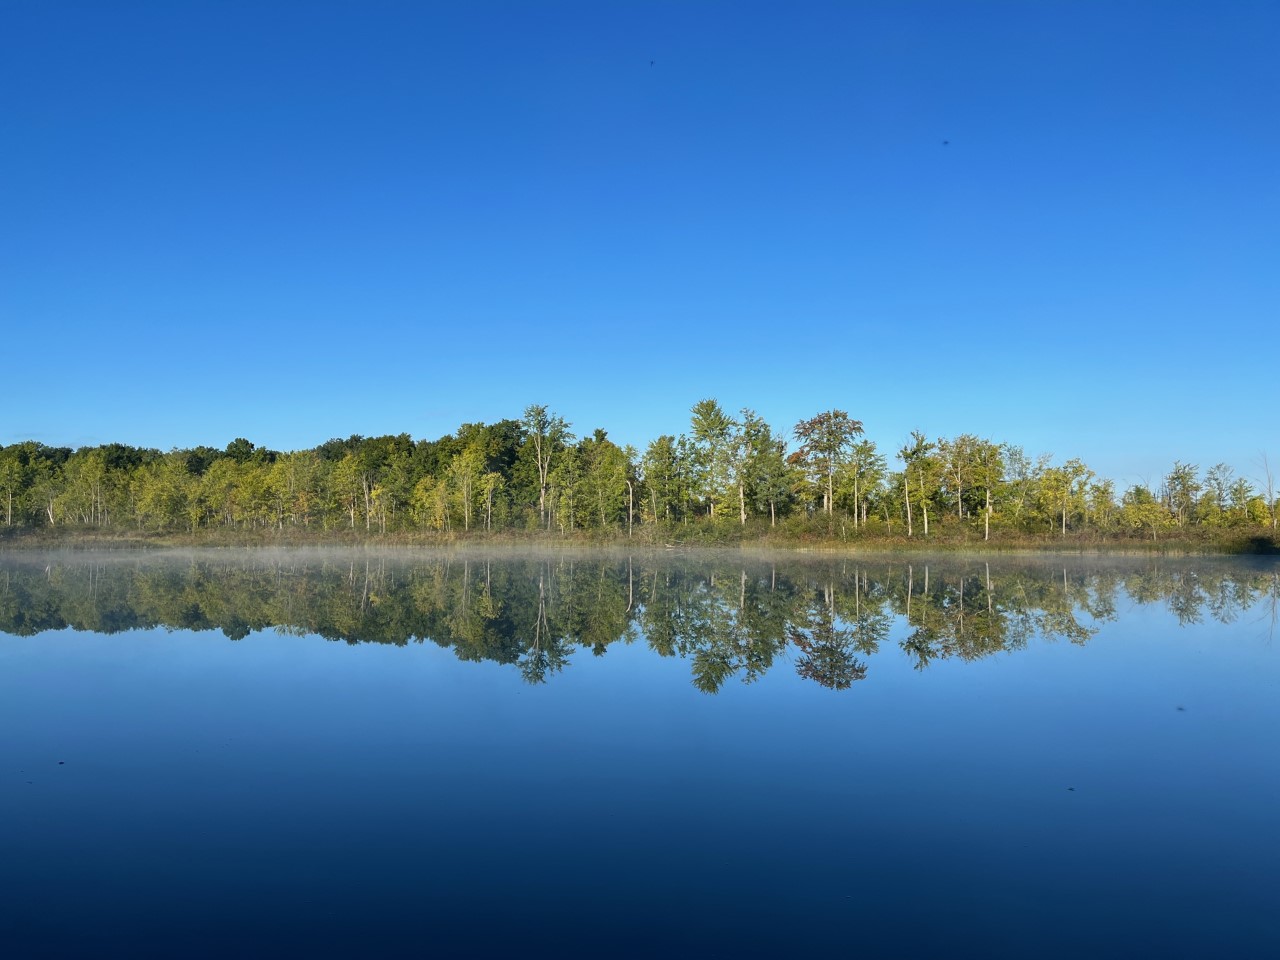 Early morning reflection on Treetop Pond